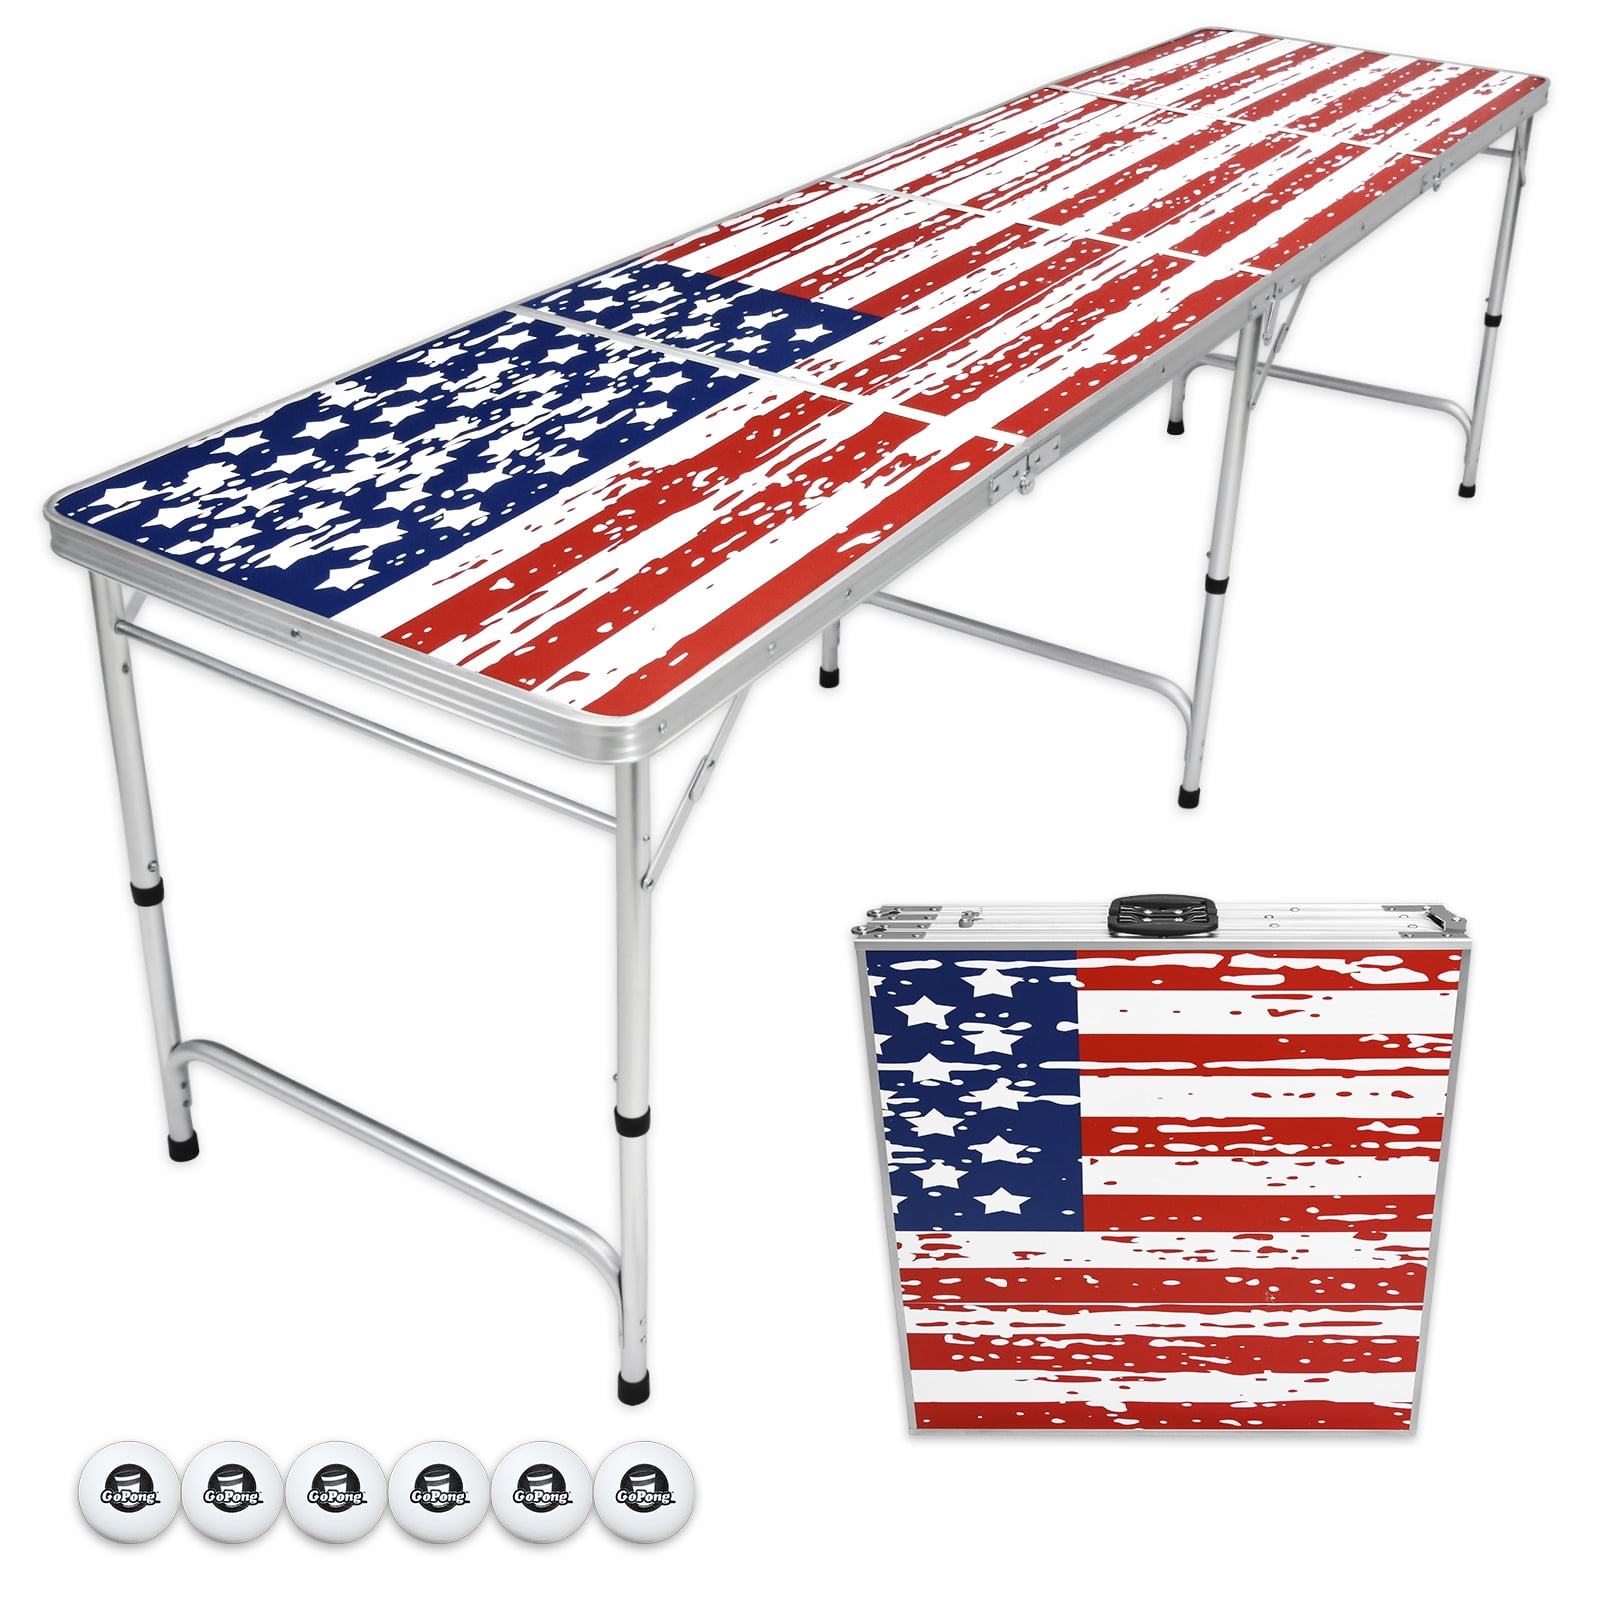 GoPong 8-Feet Beer Pong/Tailgate Table (American Flag Edition)